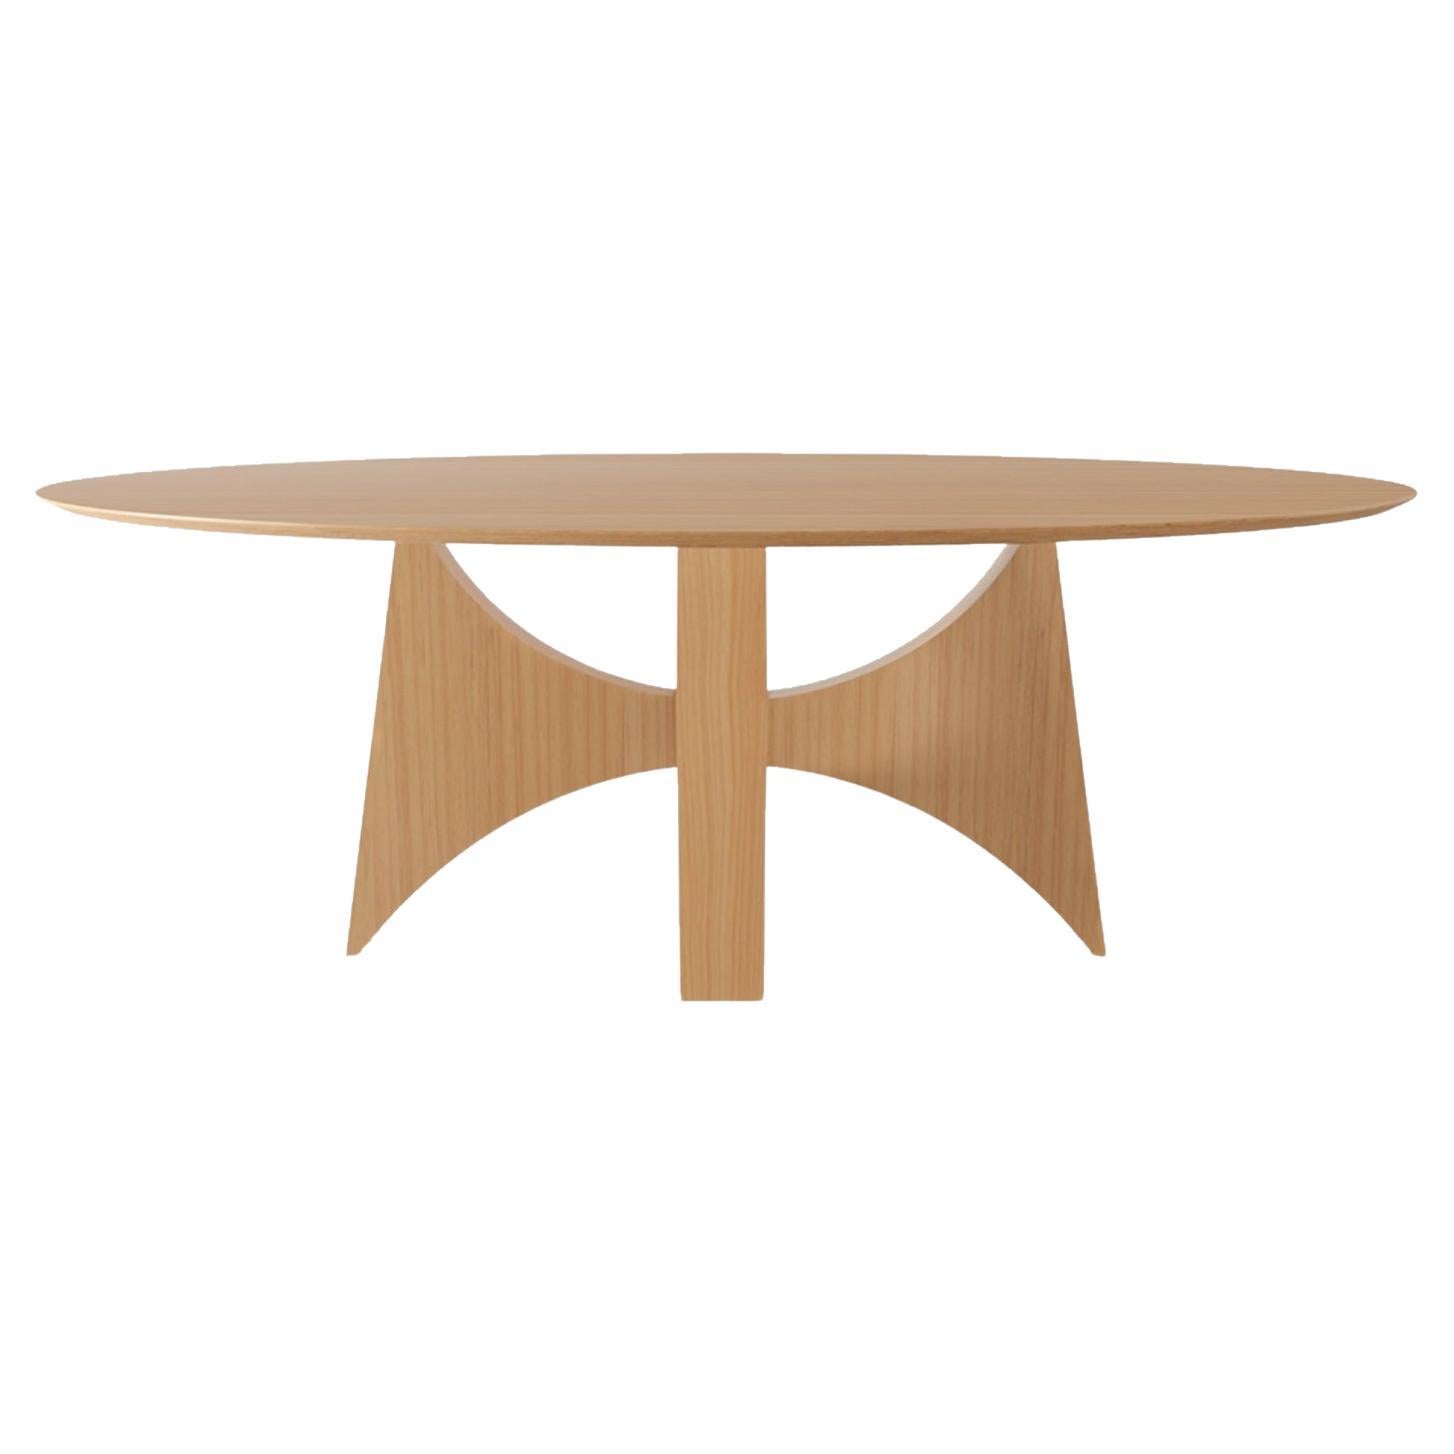 "Planalto" oval dining table in natural oak wood For Sale